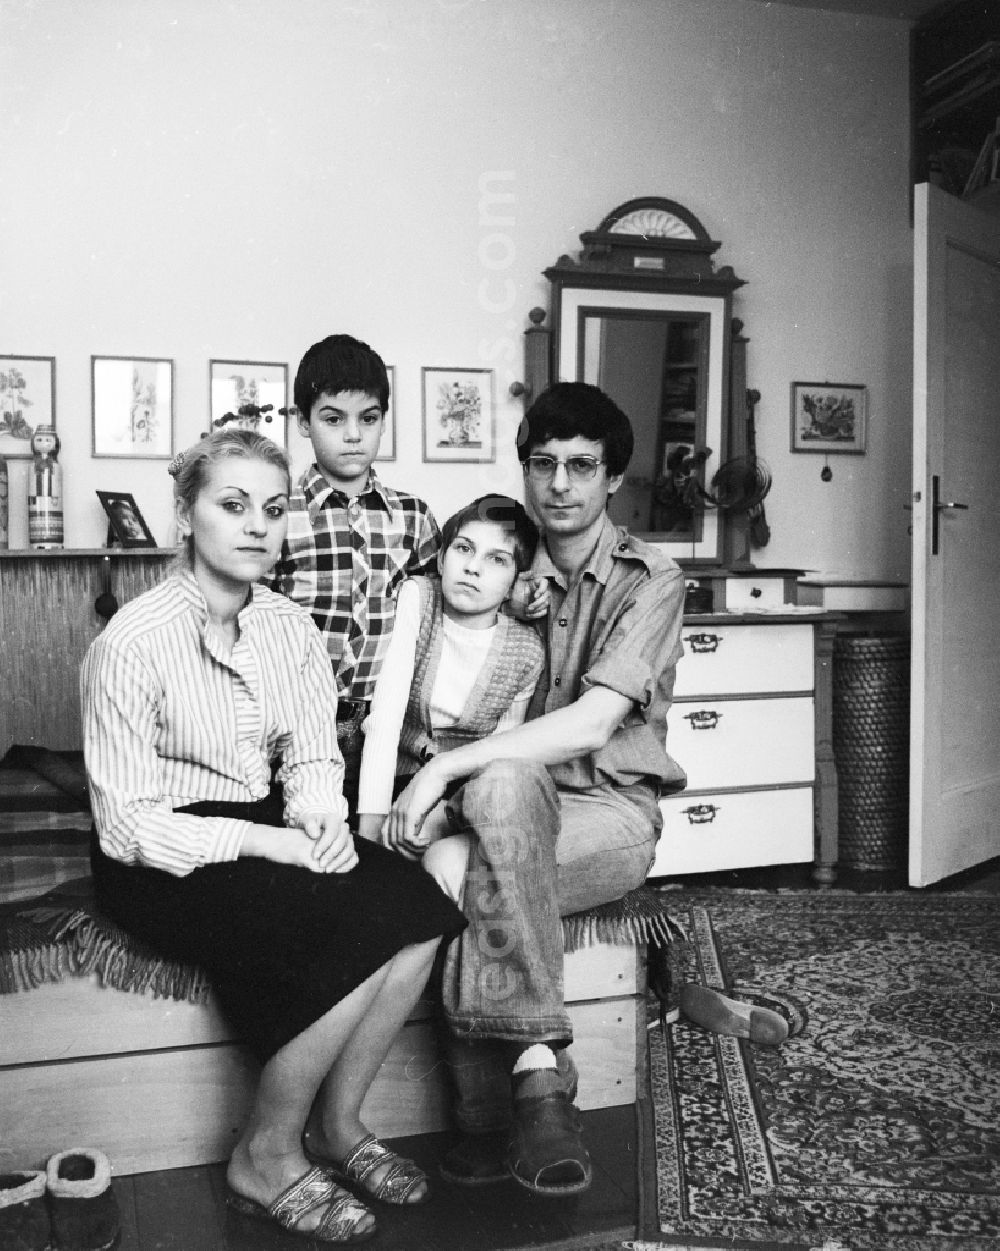 GDR photo archive: Berlin - Family Photo / group photo of a family in a Berlin apartment in Berlin